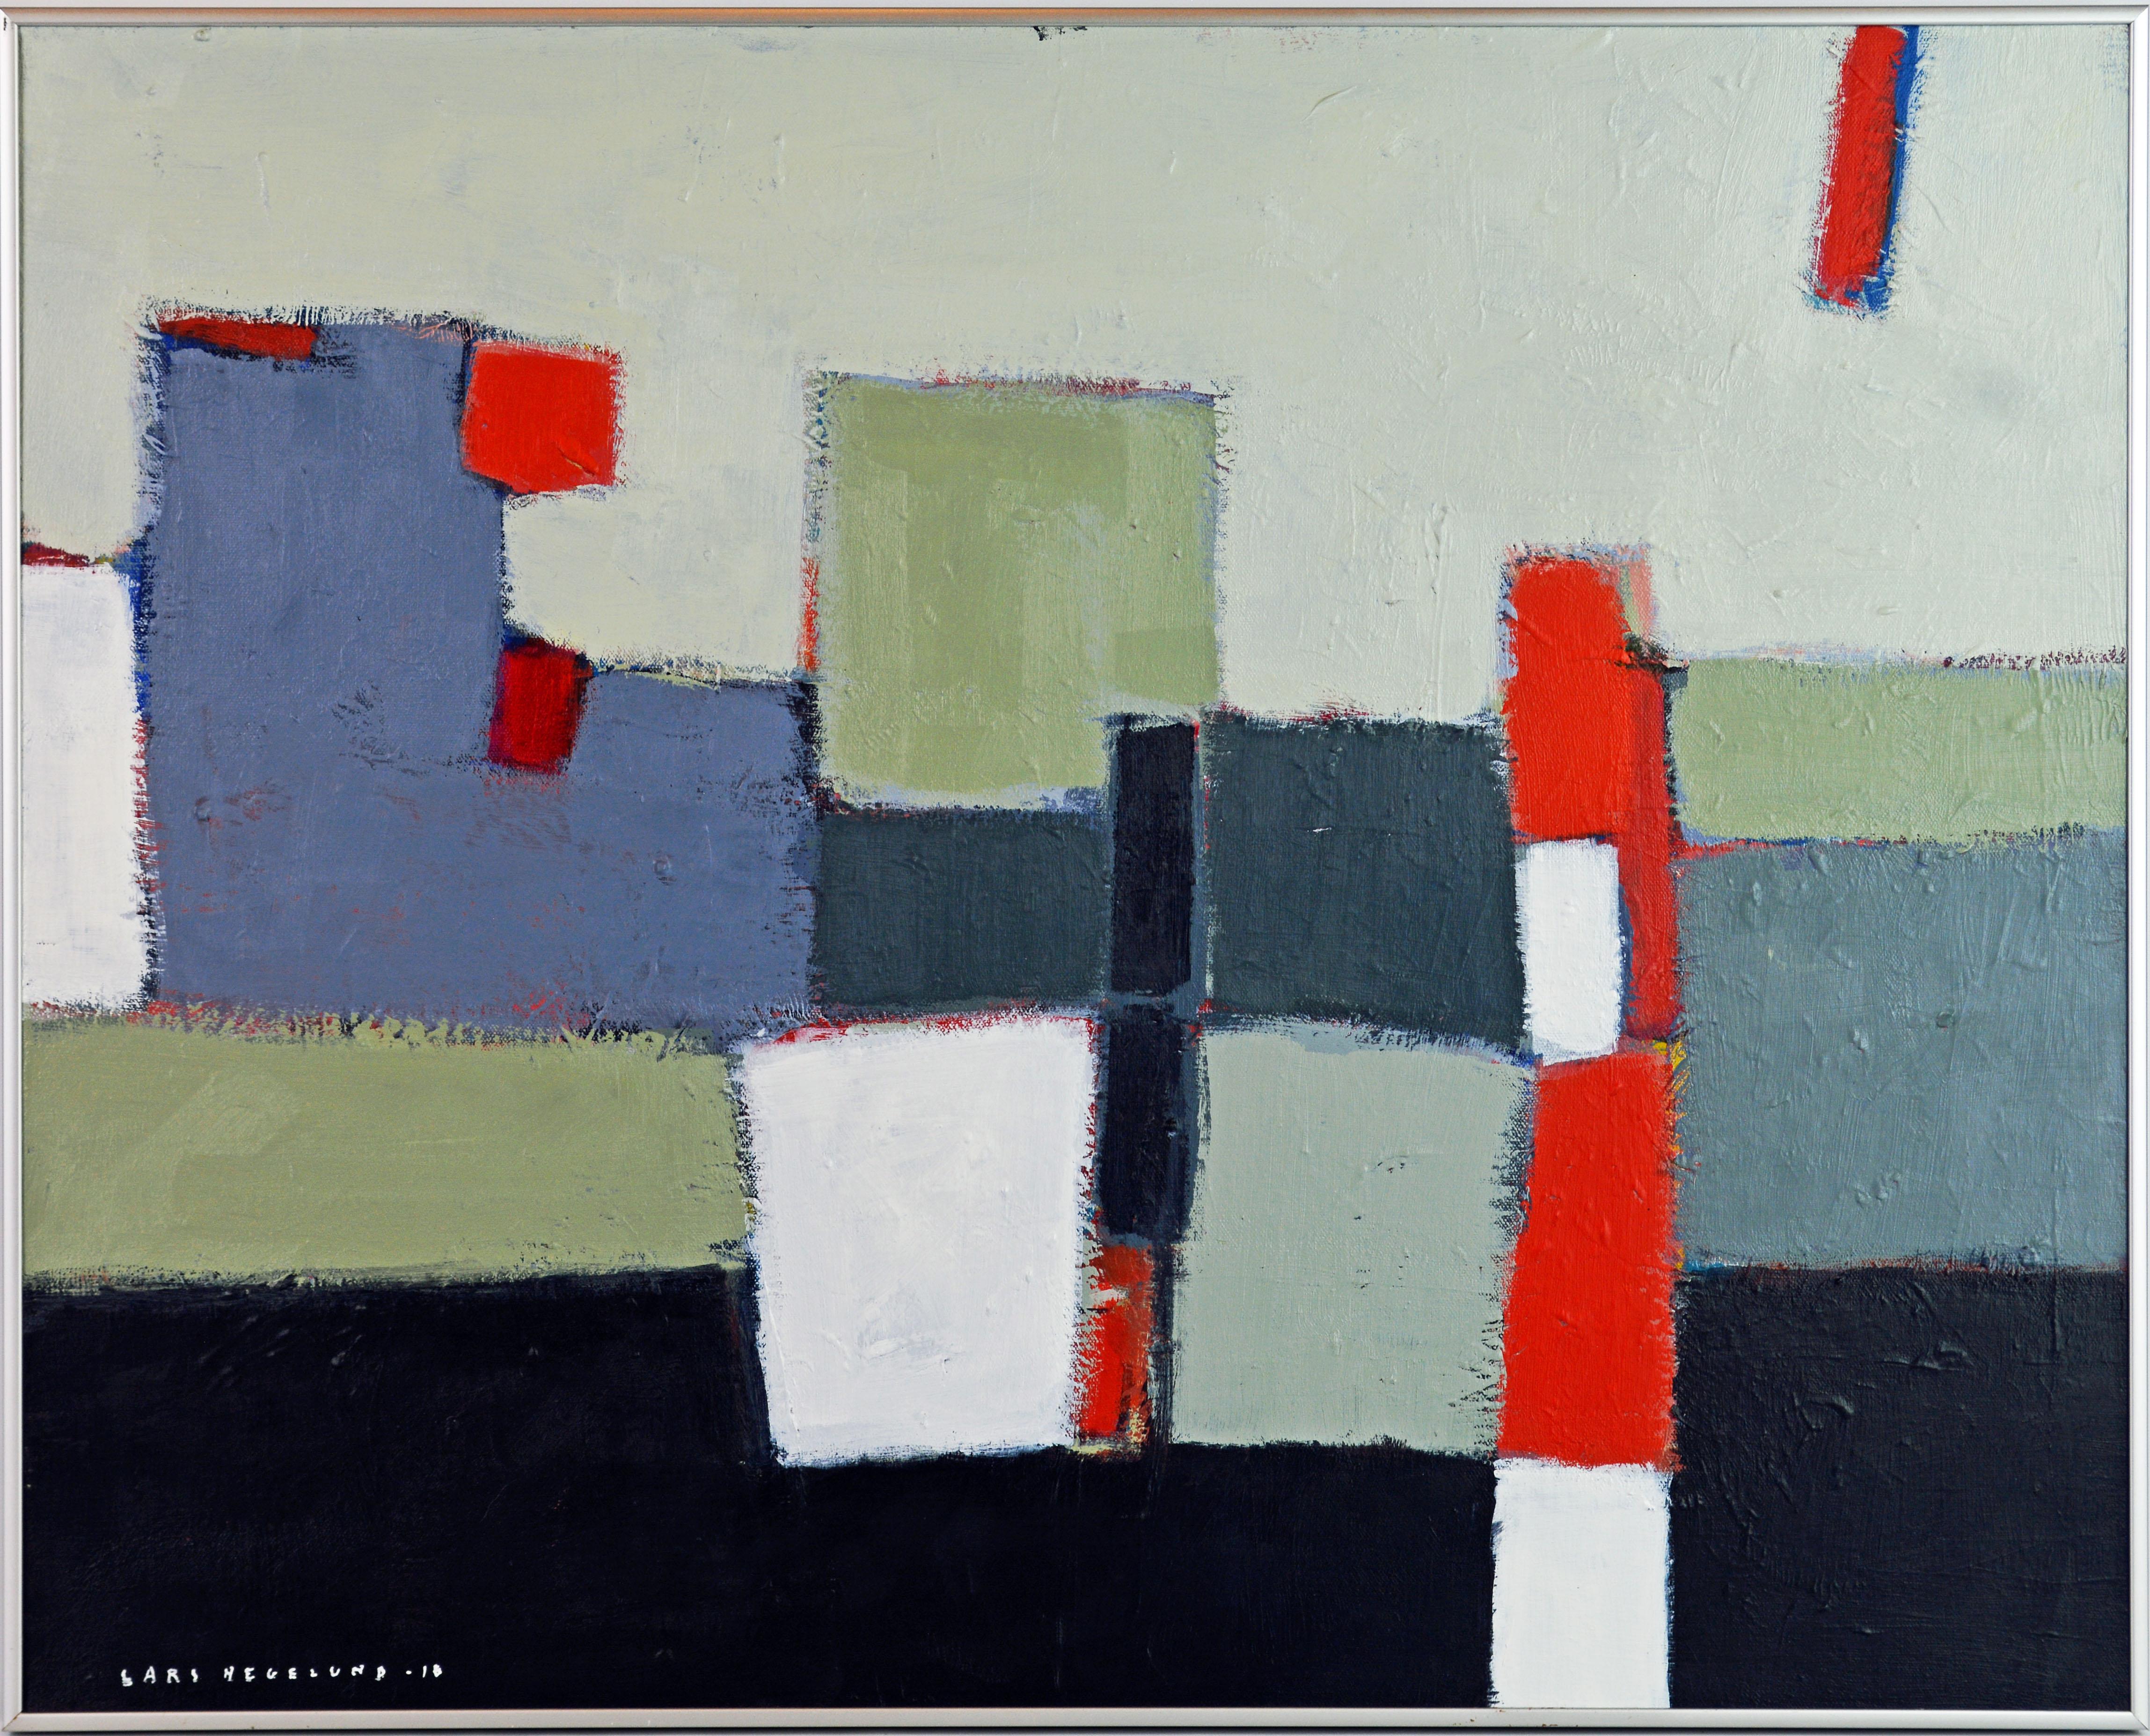 'The Docks'
by Lars Hegelund, American, b. 1947.
Measures: 24 x 30 in. without frame, 25 x 31 in. including frame,
Acrylic on canvas, signed and dated.
Housed in a Minimalist style brushed aluminium frame.

About Lars Hegelund:
Lars Hegelund